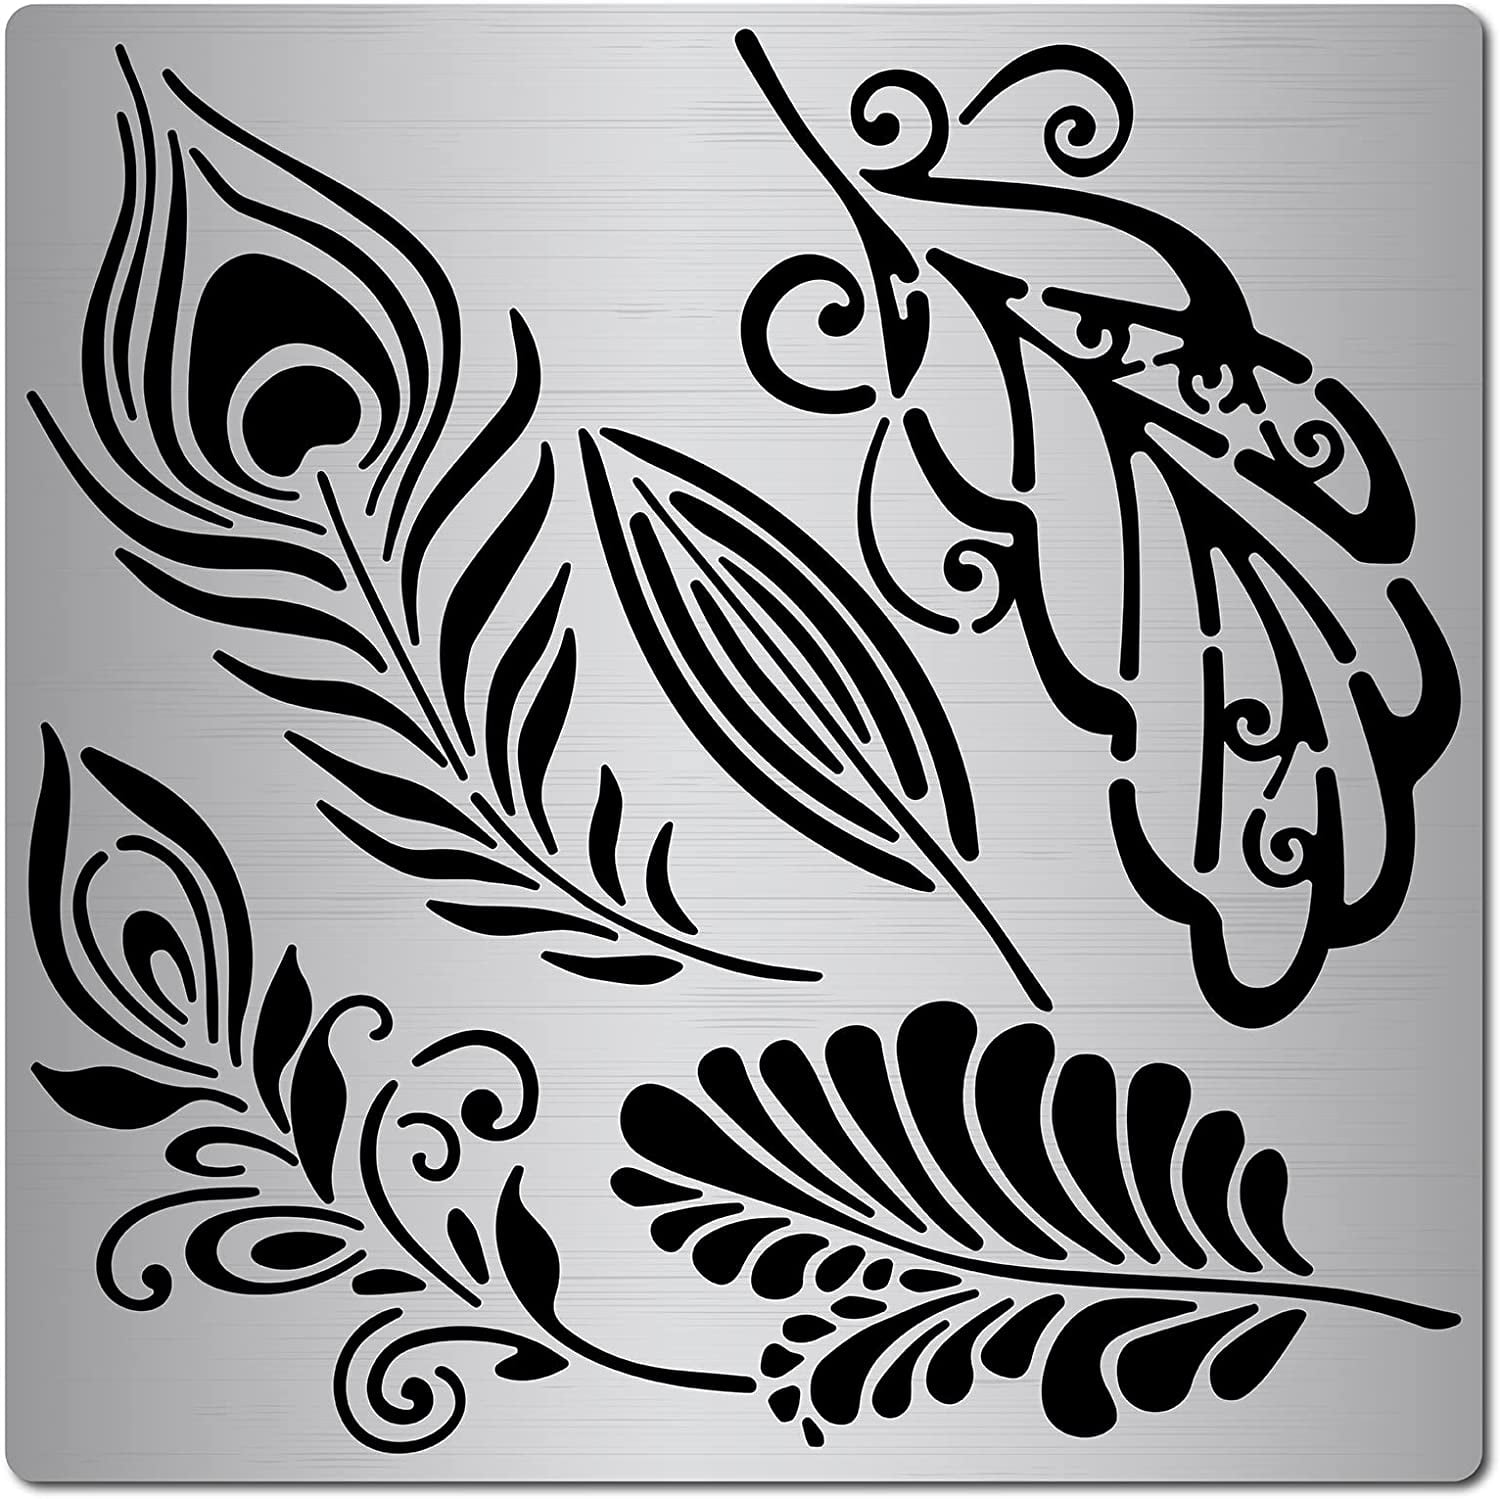 6.3 Inch Lotus Metal Stencil Flower Yoga Stencils Stainless Steel Floral  Painting Reusable Templates Journal Tool for Painting on Wood Wood Burning  Pyrography and Engraving 